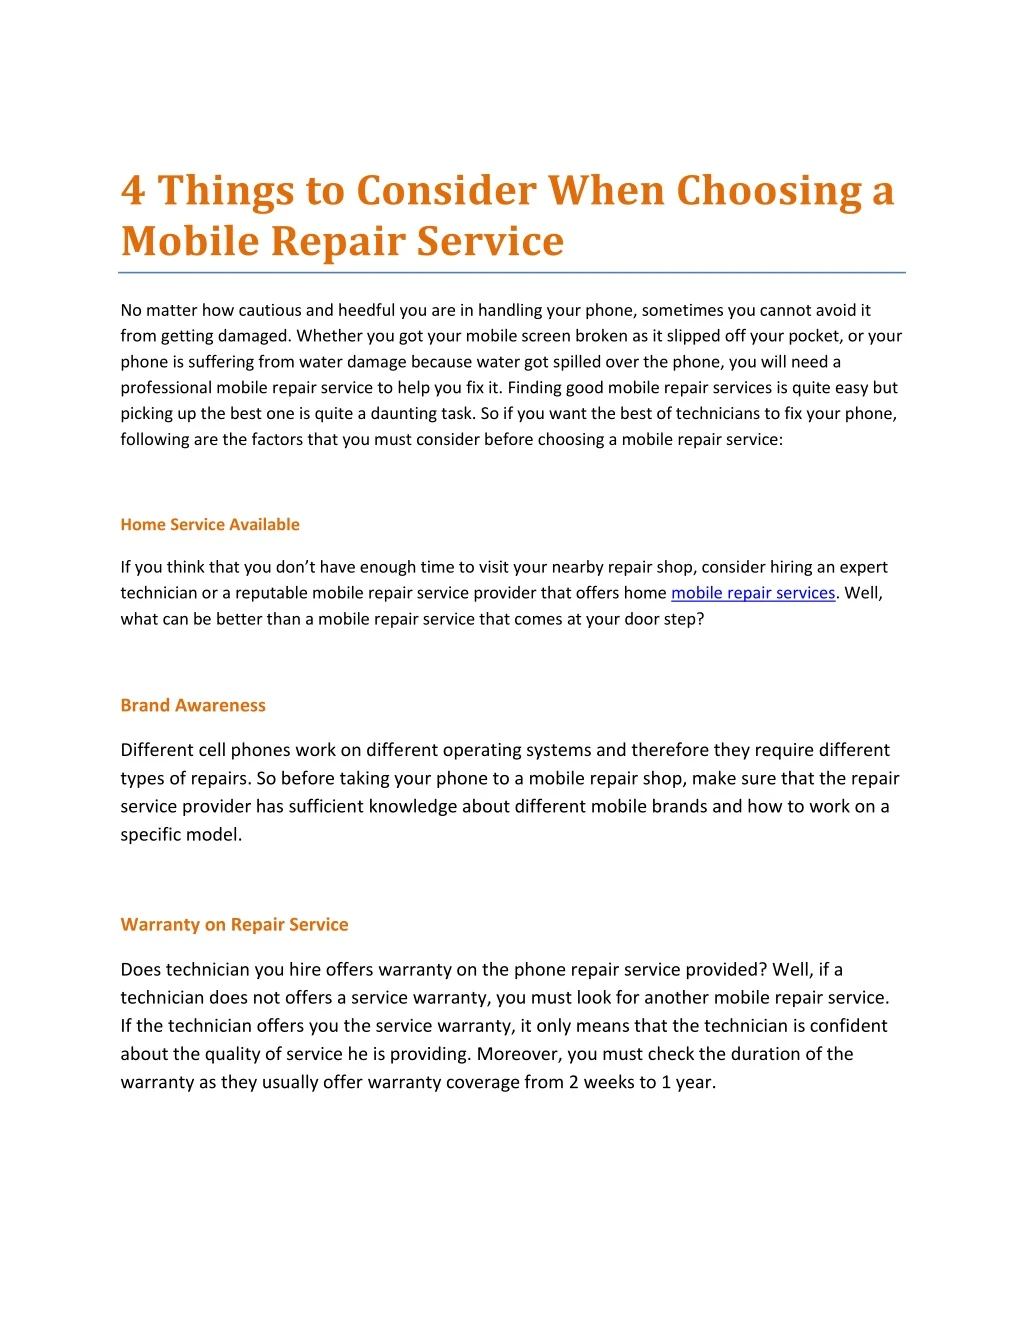 4 things to consider when choosing a mobile